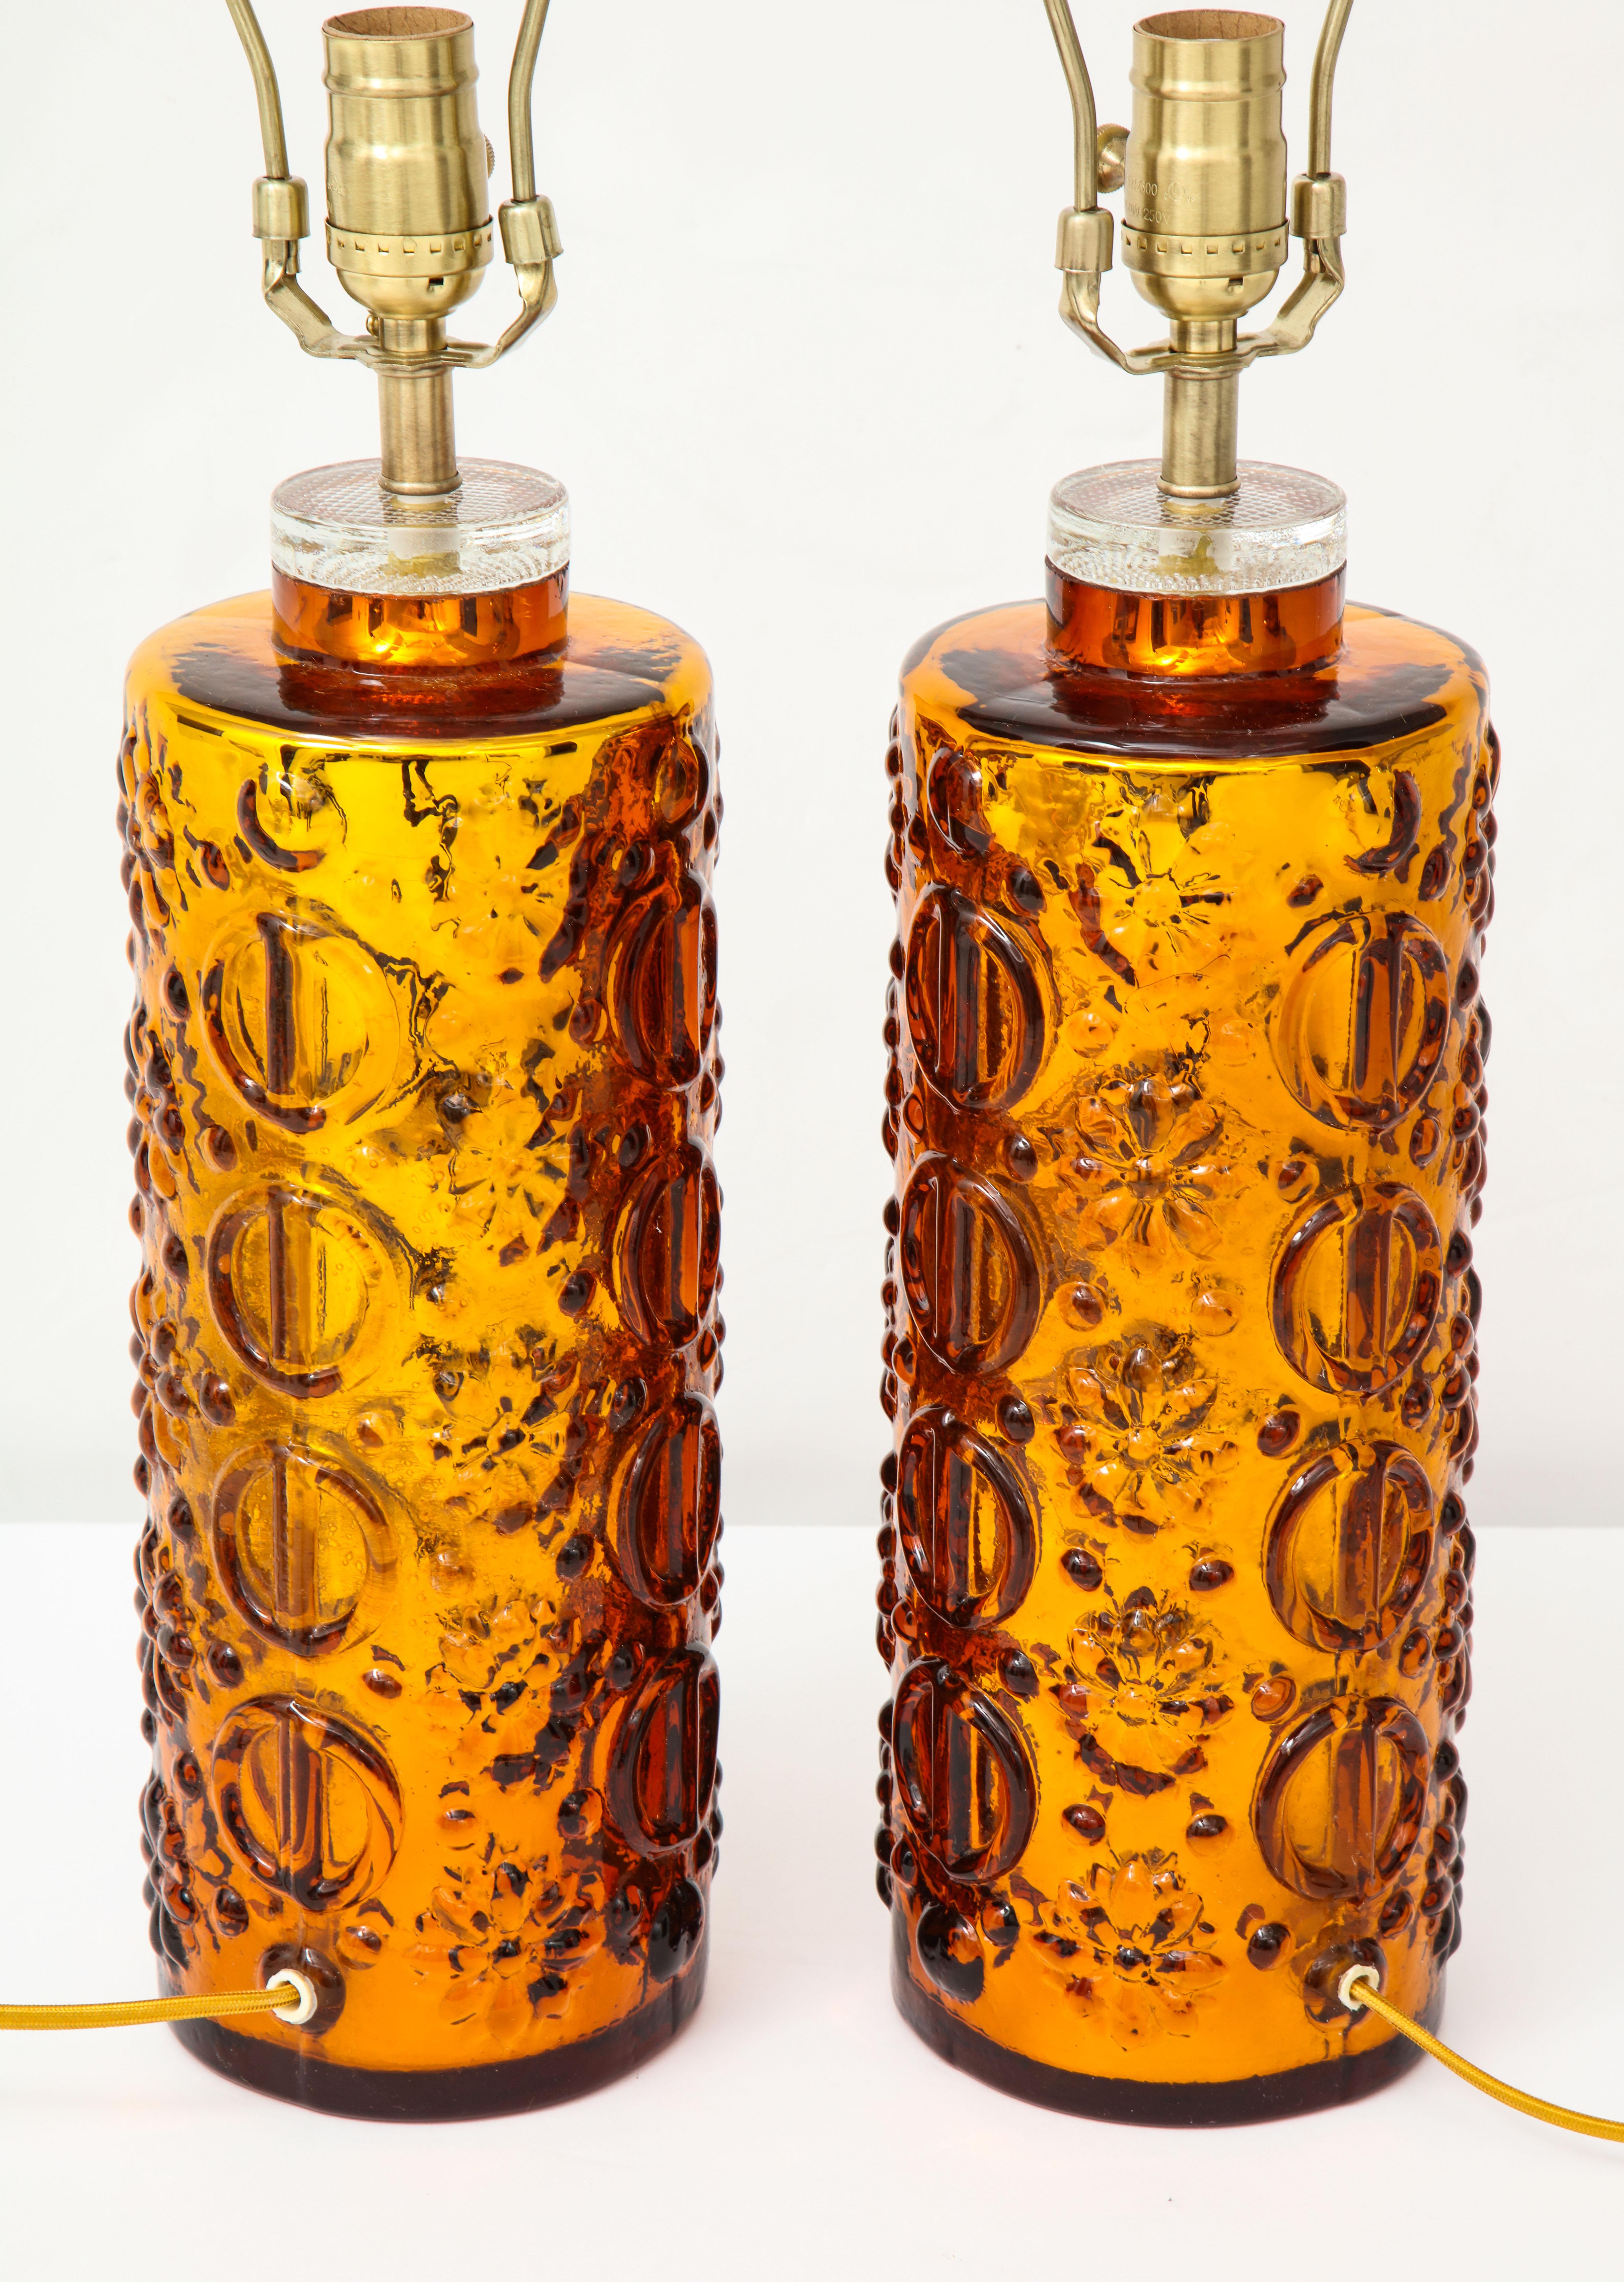 Johansfors Graphic Patterned Gold Glass Lamps In Excellent Condition For Sale In New York, NY